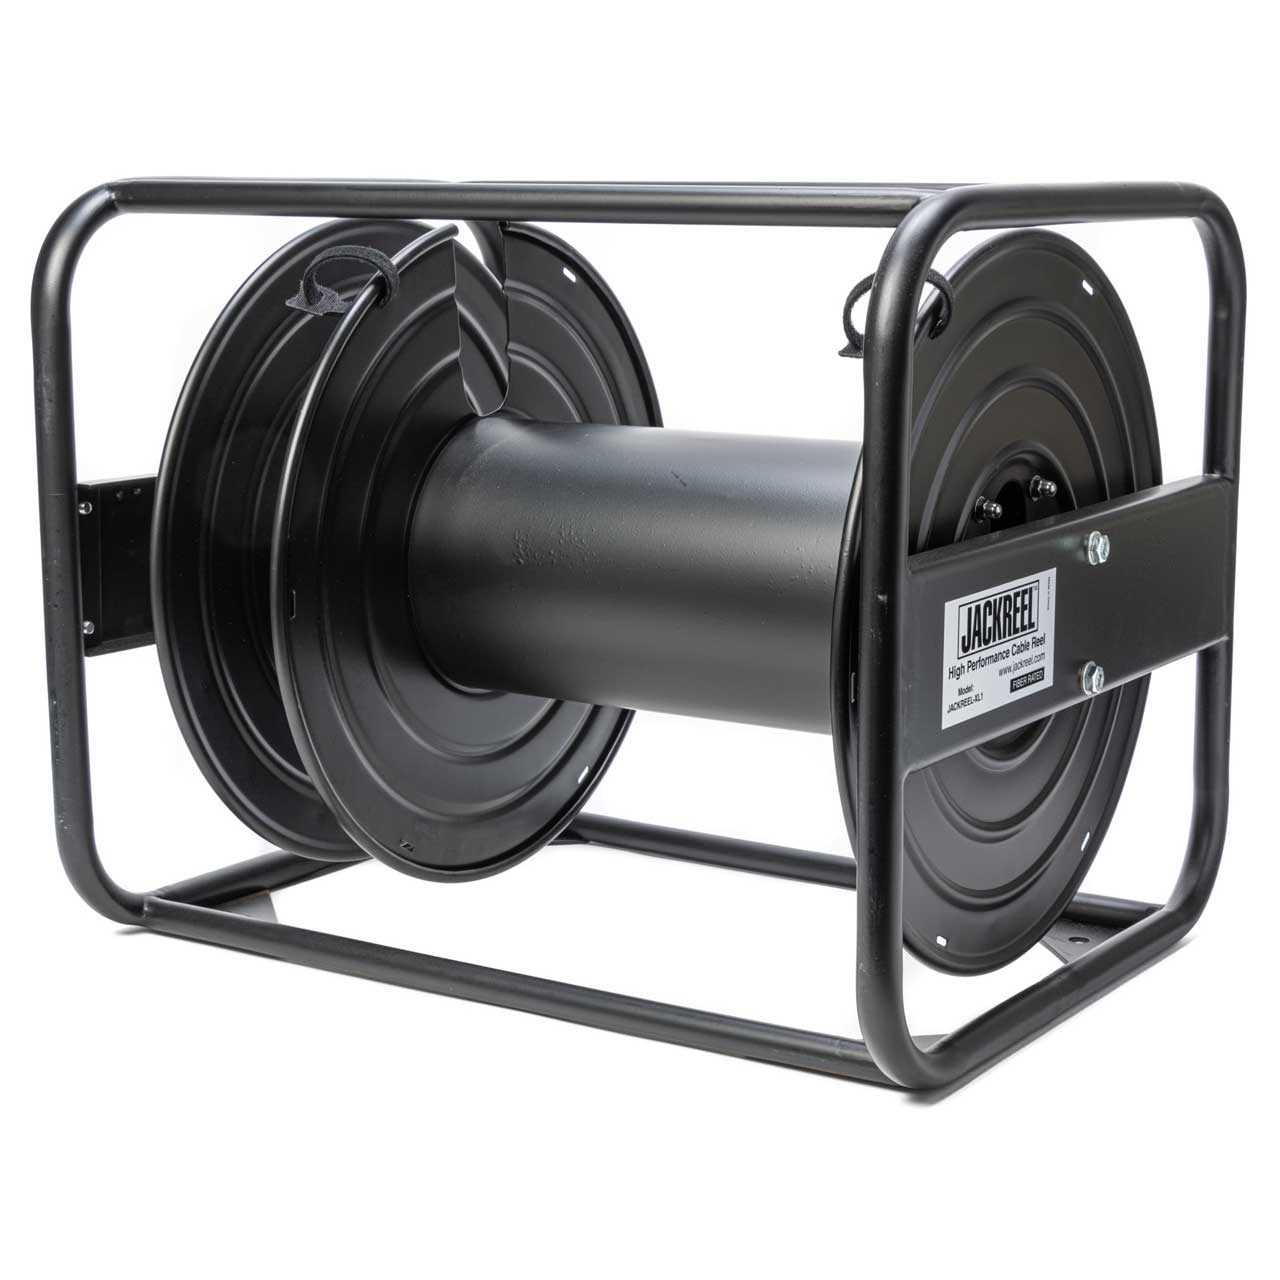 JackReel XL1 High Capacity Broadcast Cable & Fiber Optic Cable Reel -  Bstock (Scratches/Box Damage)